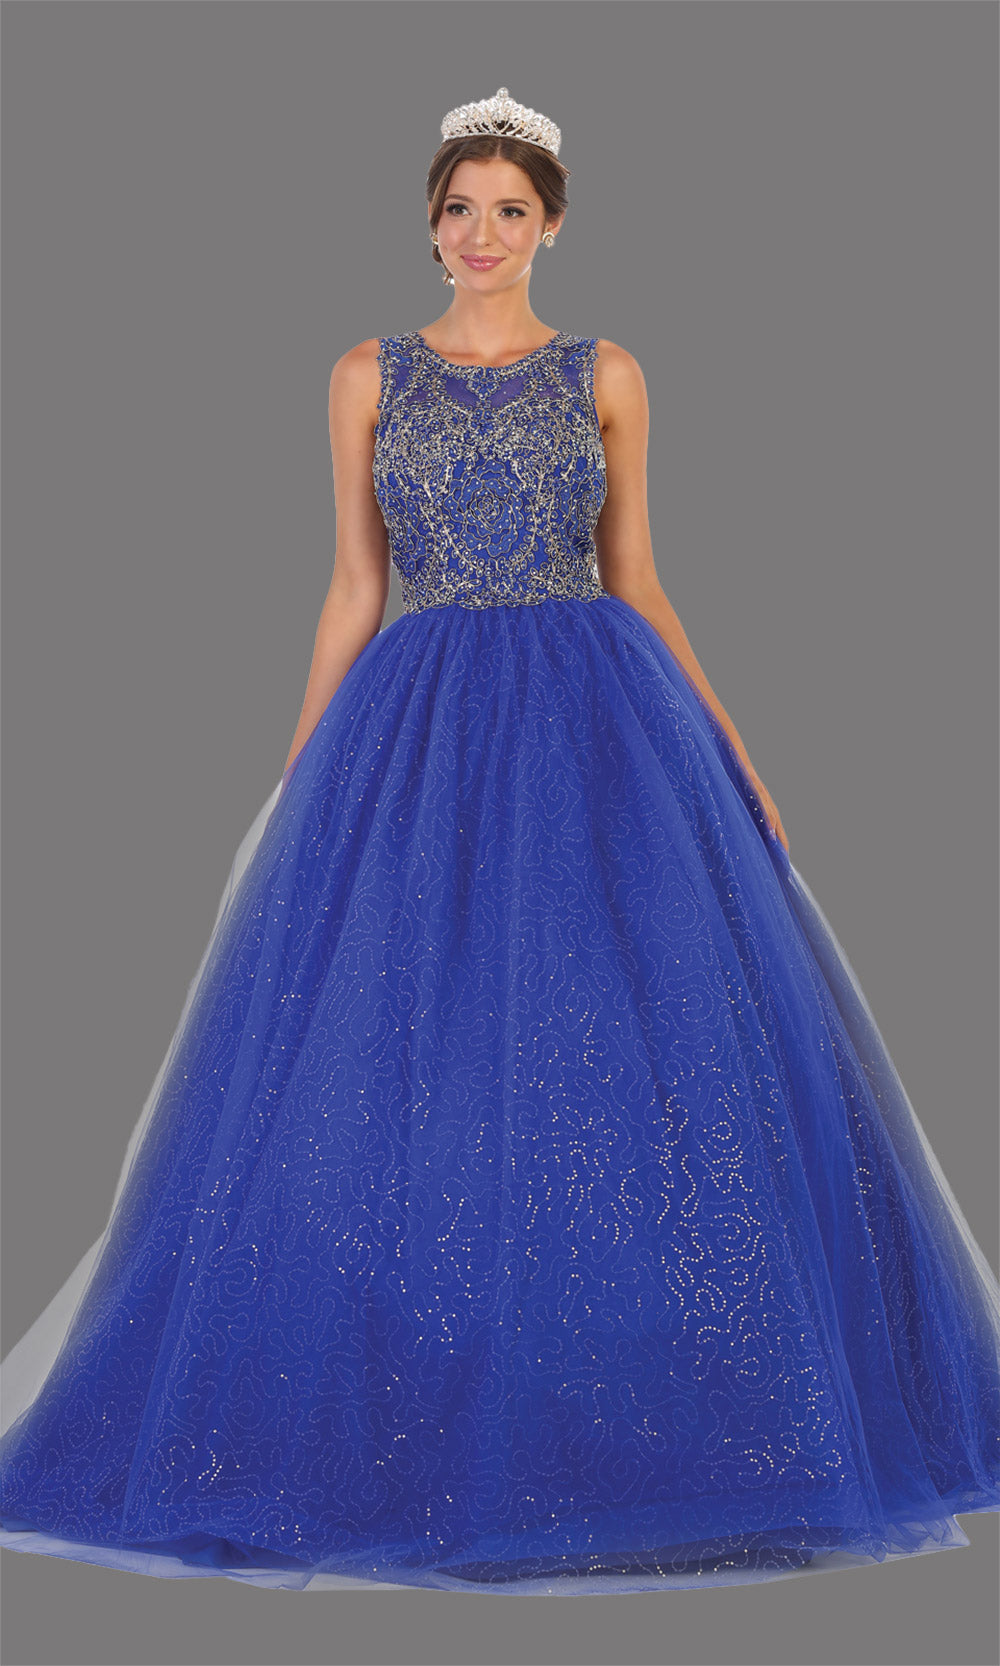 Mayqueen LK137 royal blue quinceanera high neck w/gold lace ball gown. Royal blue sequin ball gown is perfect for engagement dress, wedding reception, indowestern party gown, sweet 16, debut, sweet 15, sweet 18. Plus sizes available for ballgowns.jpg